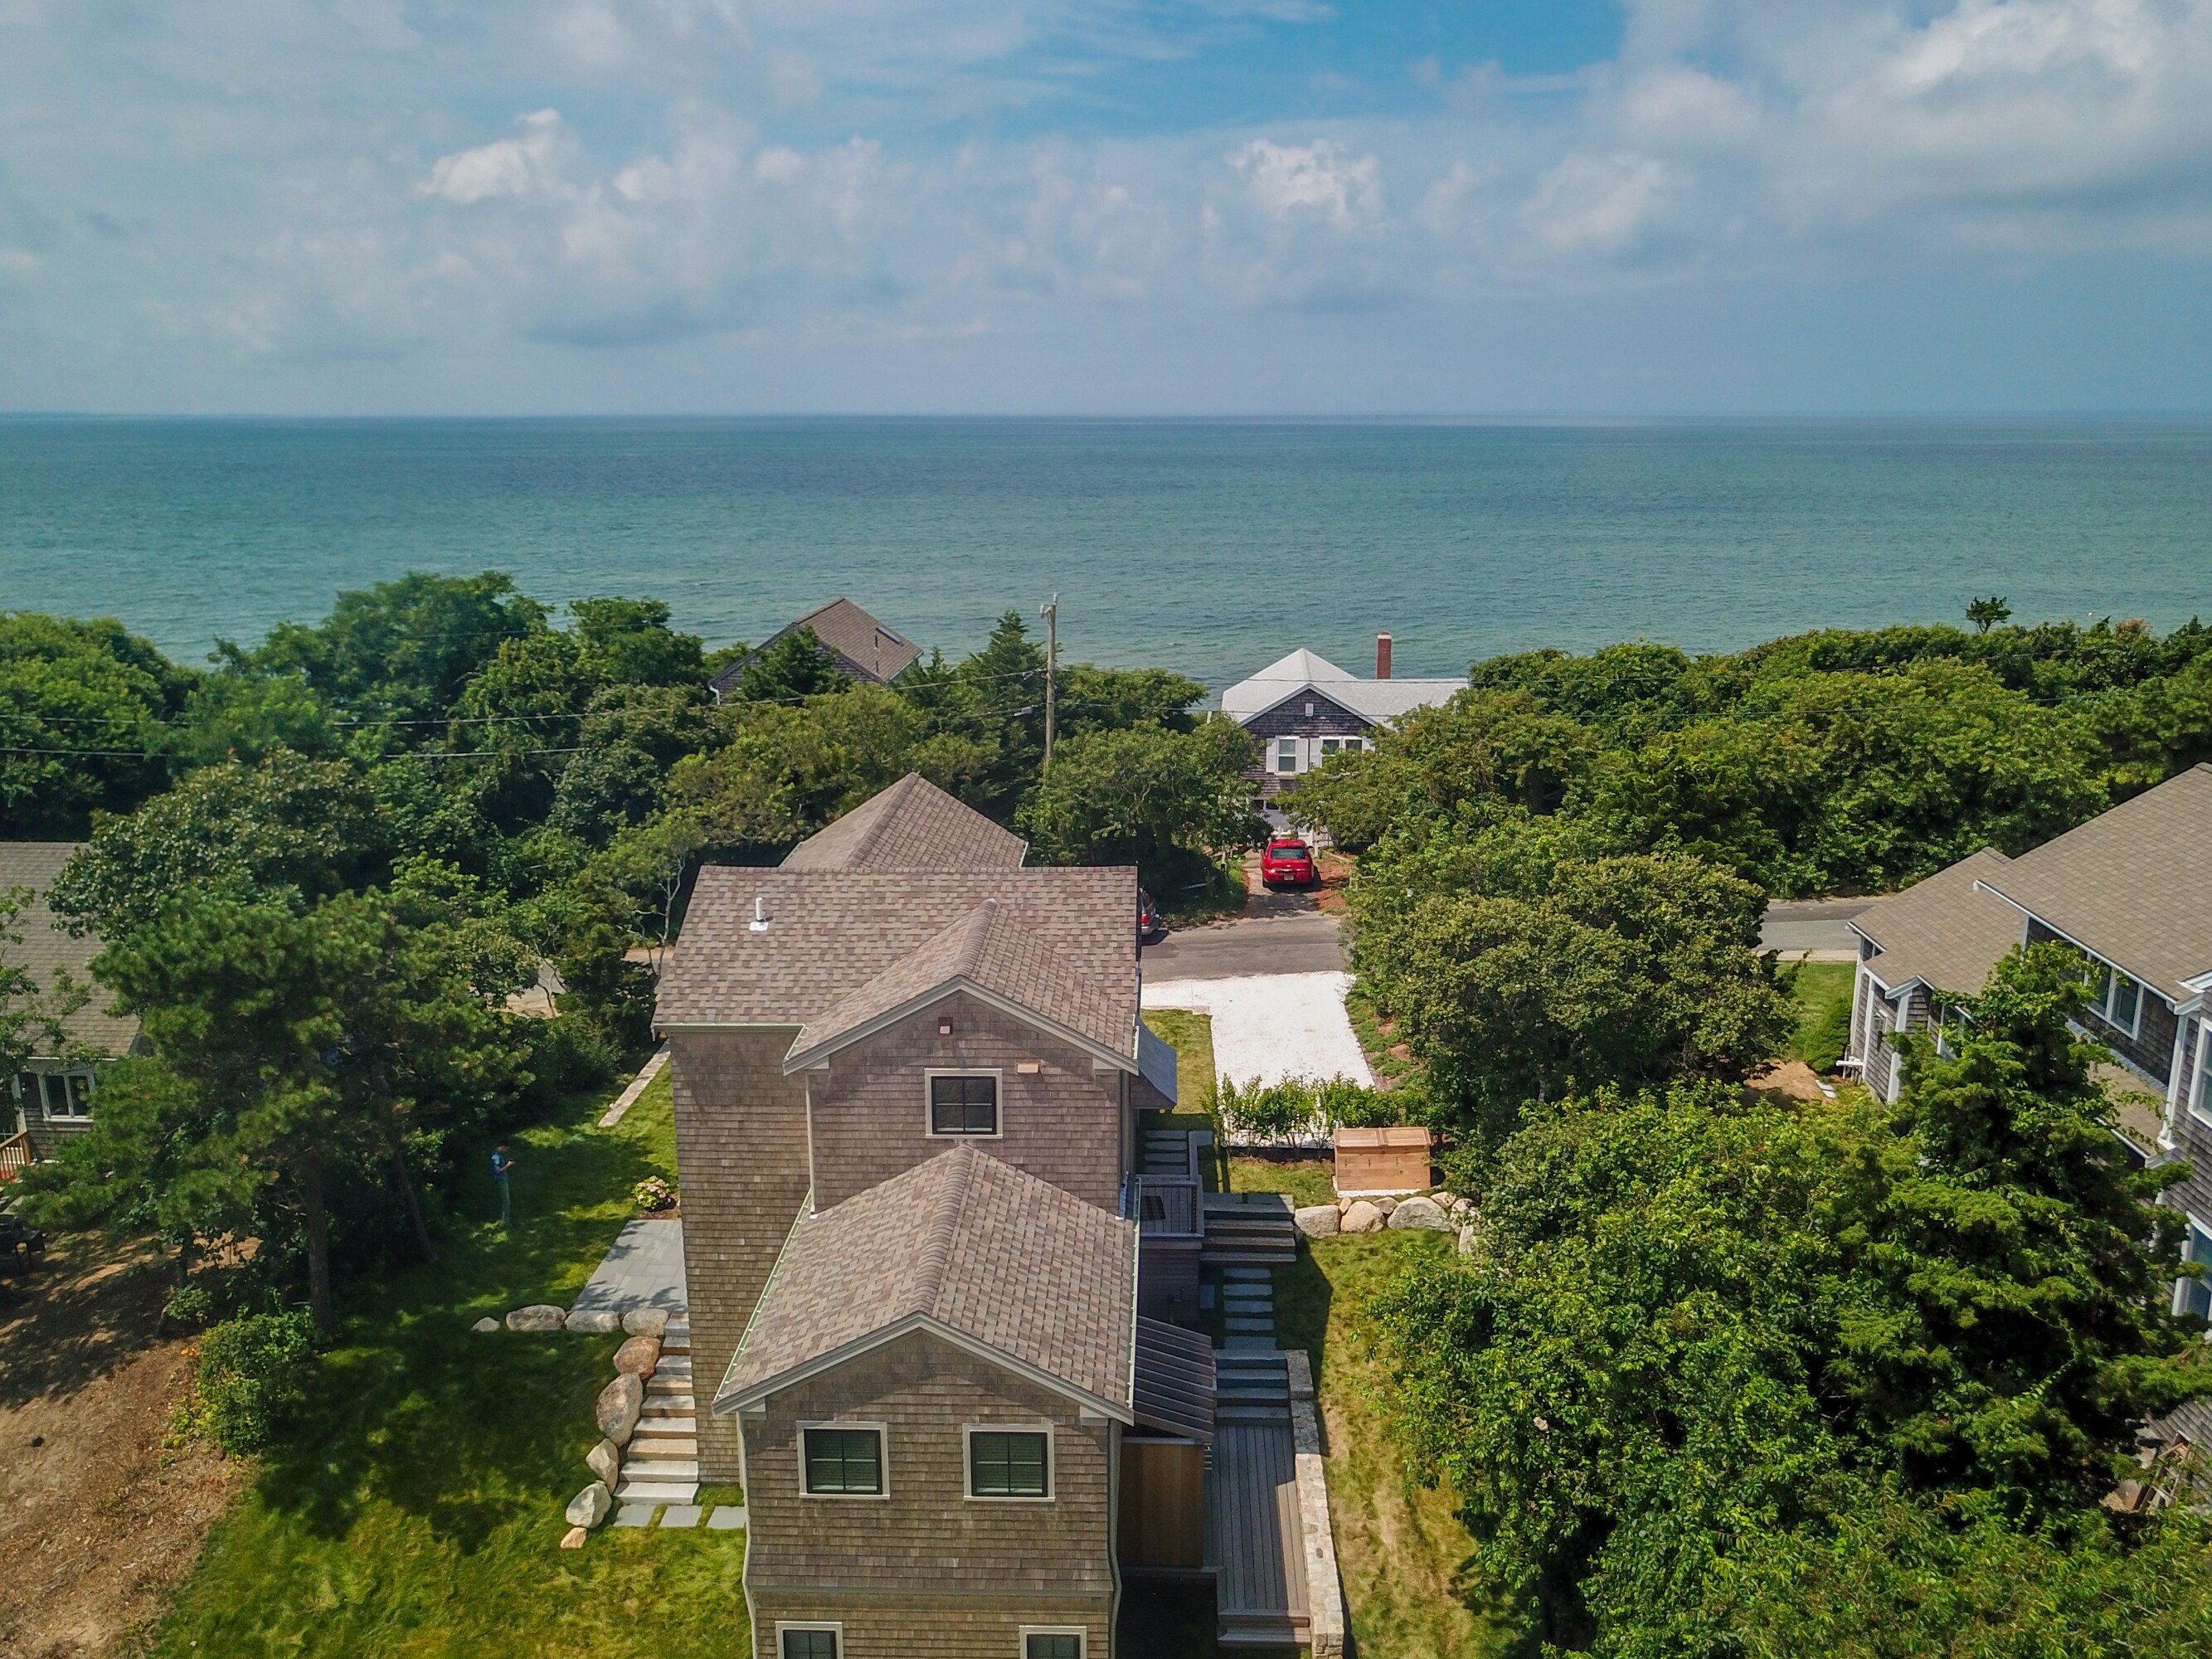 Property Image 1 - 14424: Gorgeous Architectural Home w/ Water Views, Steps From Private Beach!